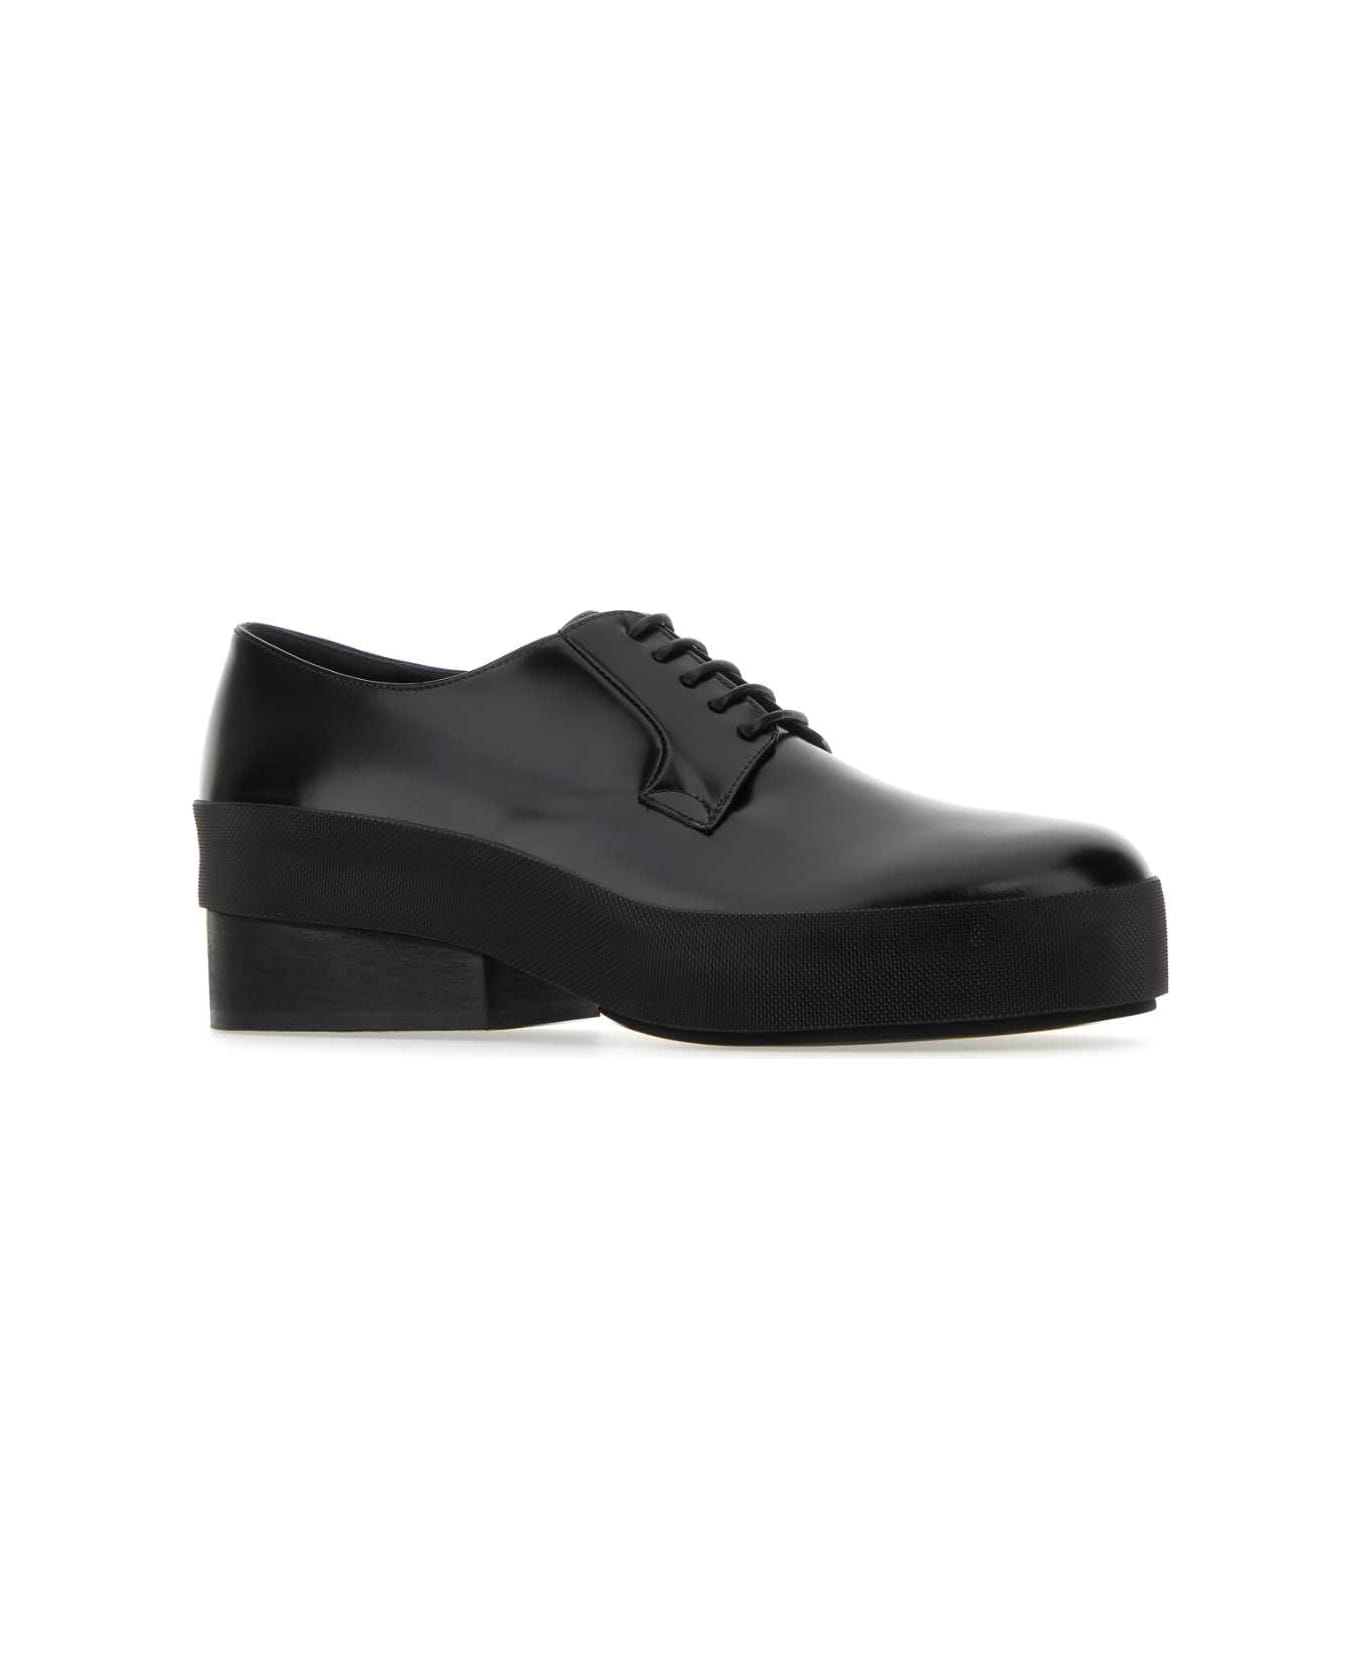 Raf Simons Black Leather Lace-up Shoes - 0099